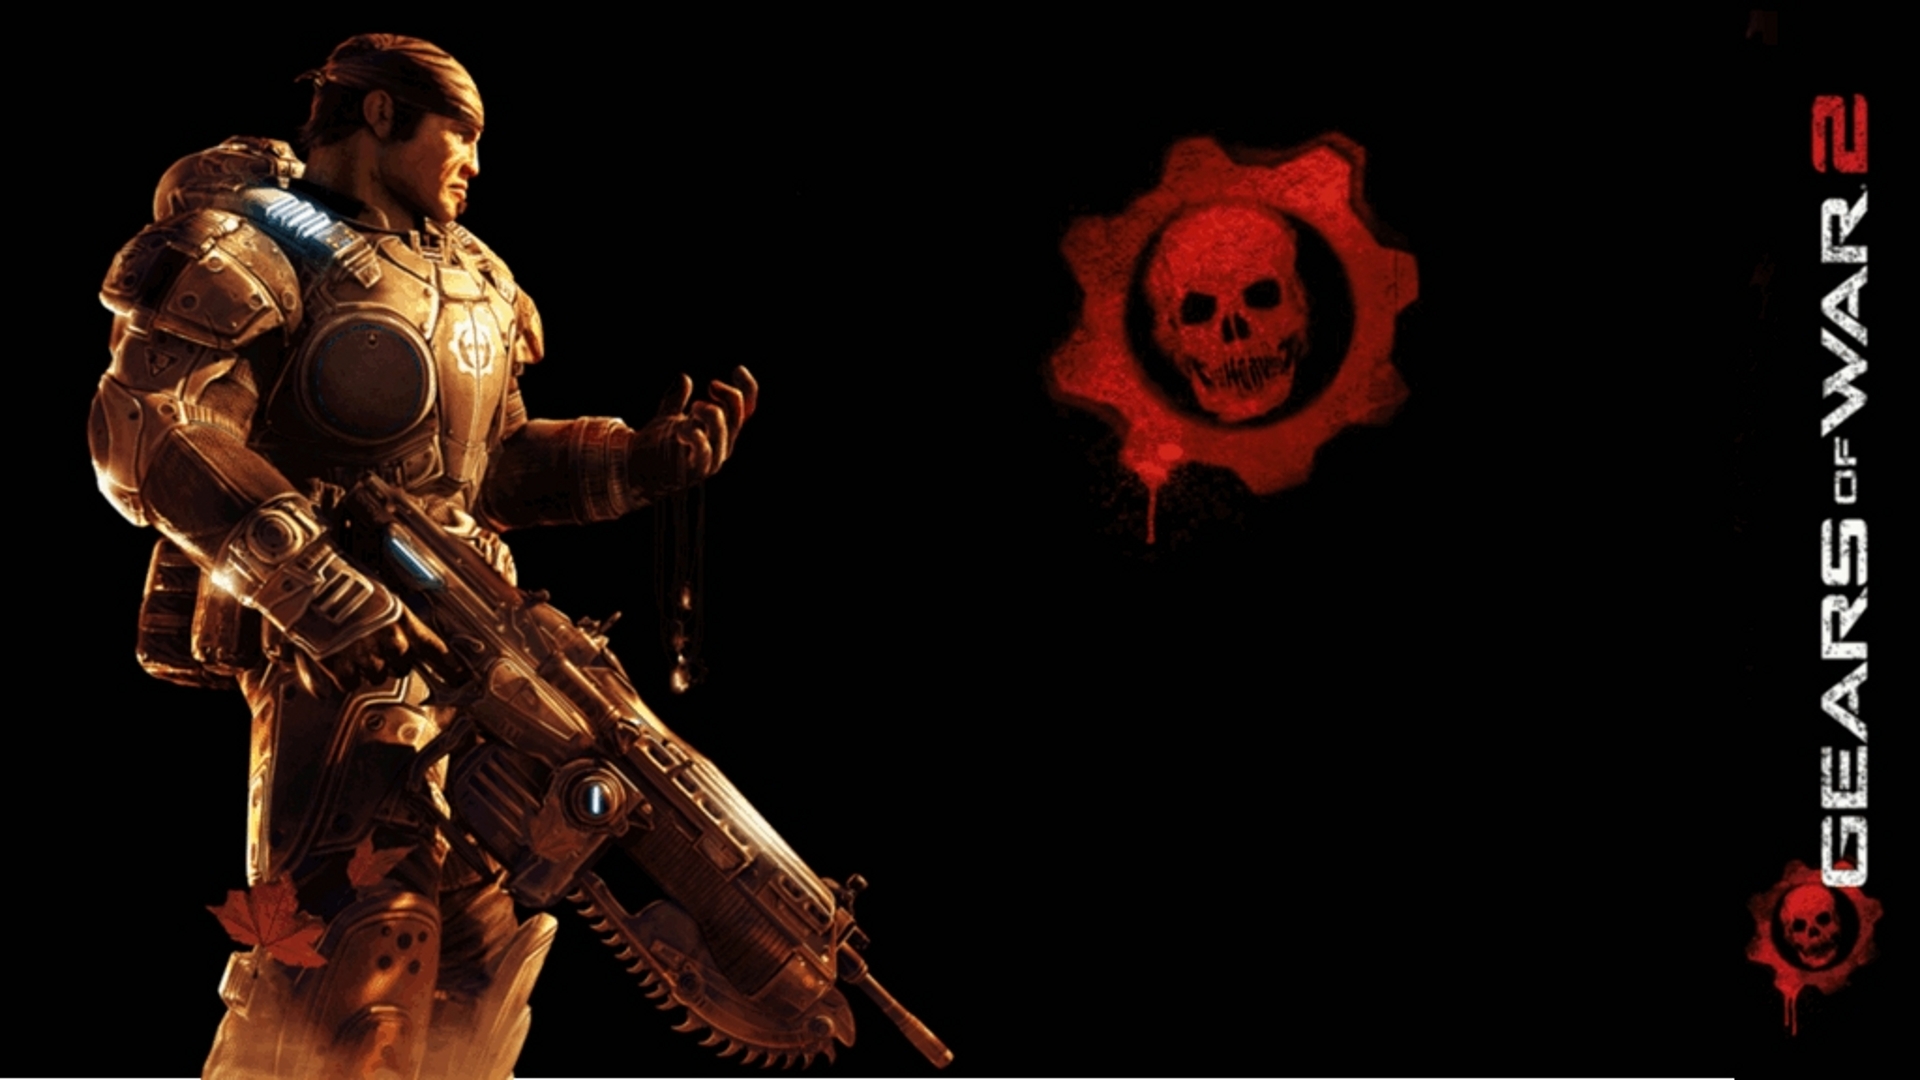 Gears of War 2. Submitted by Morkot